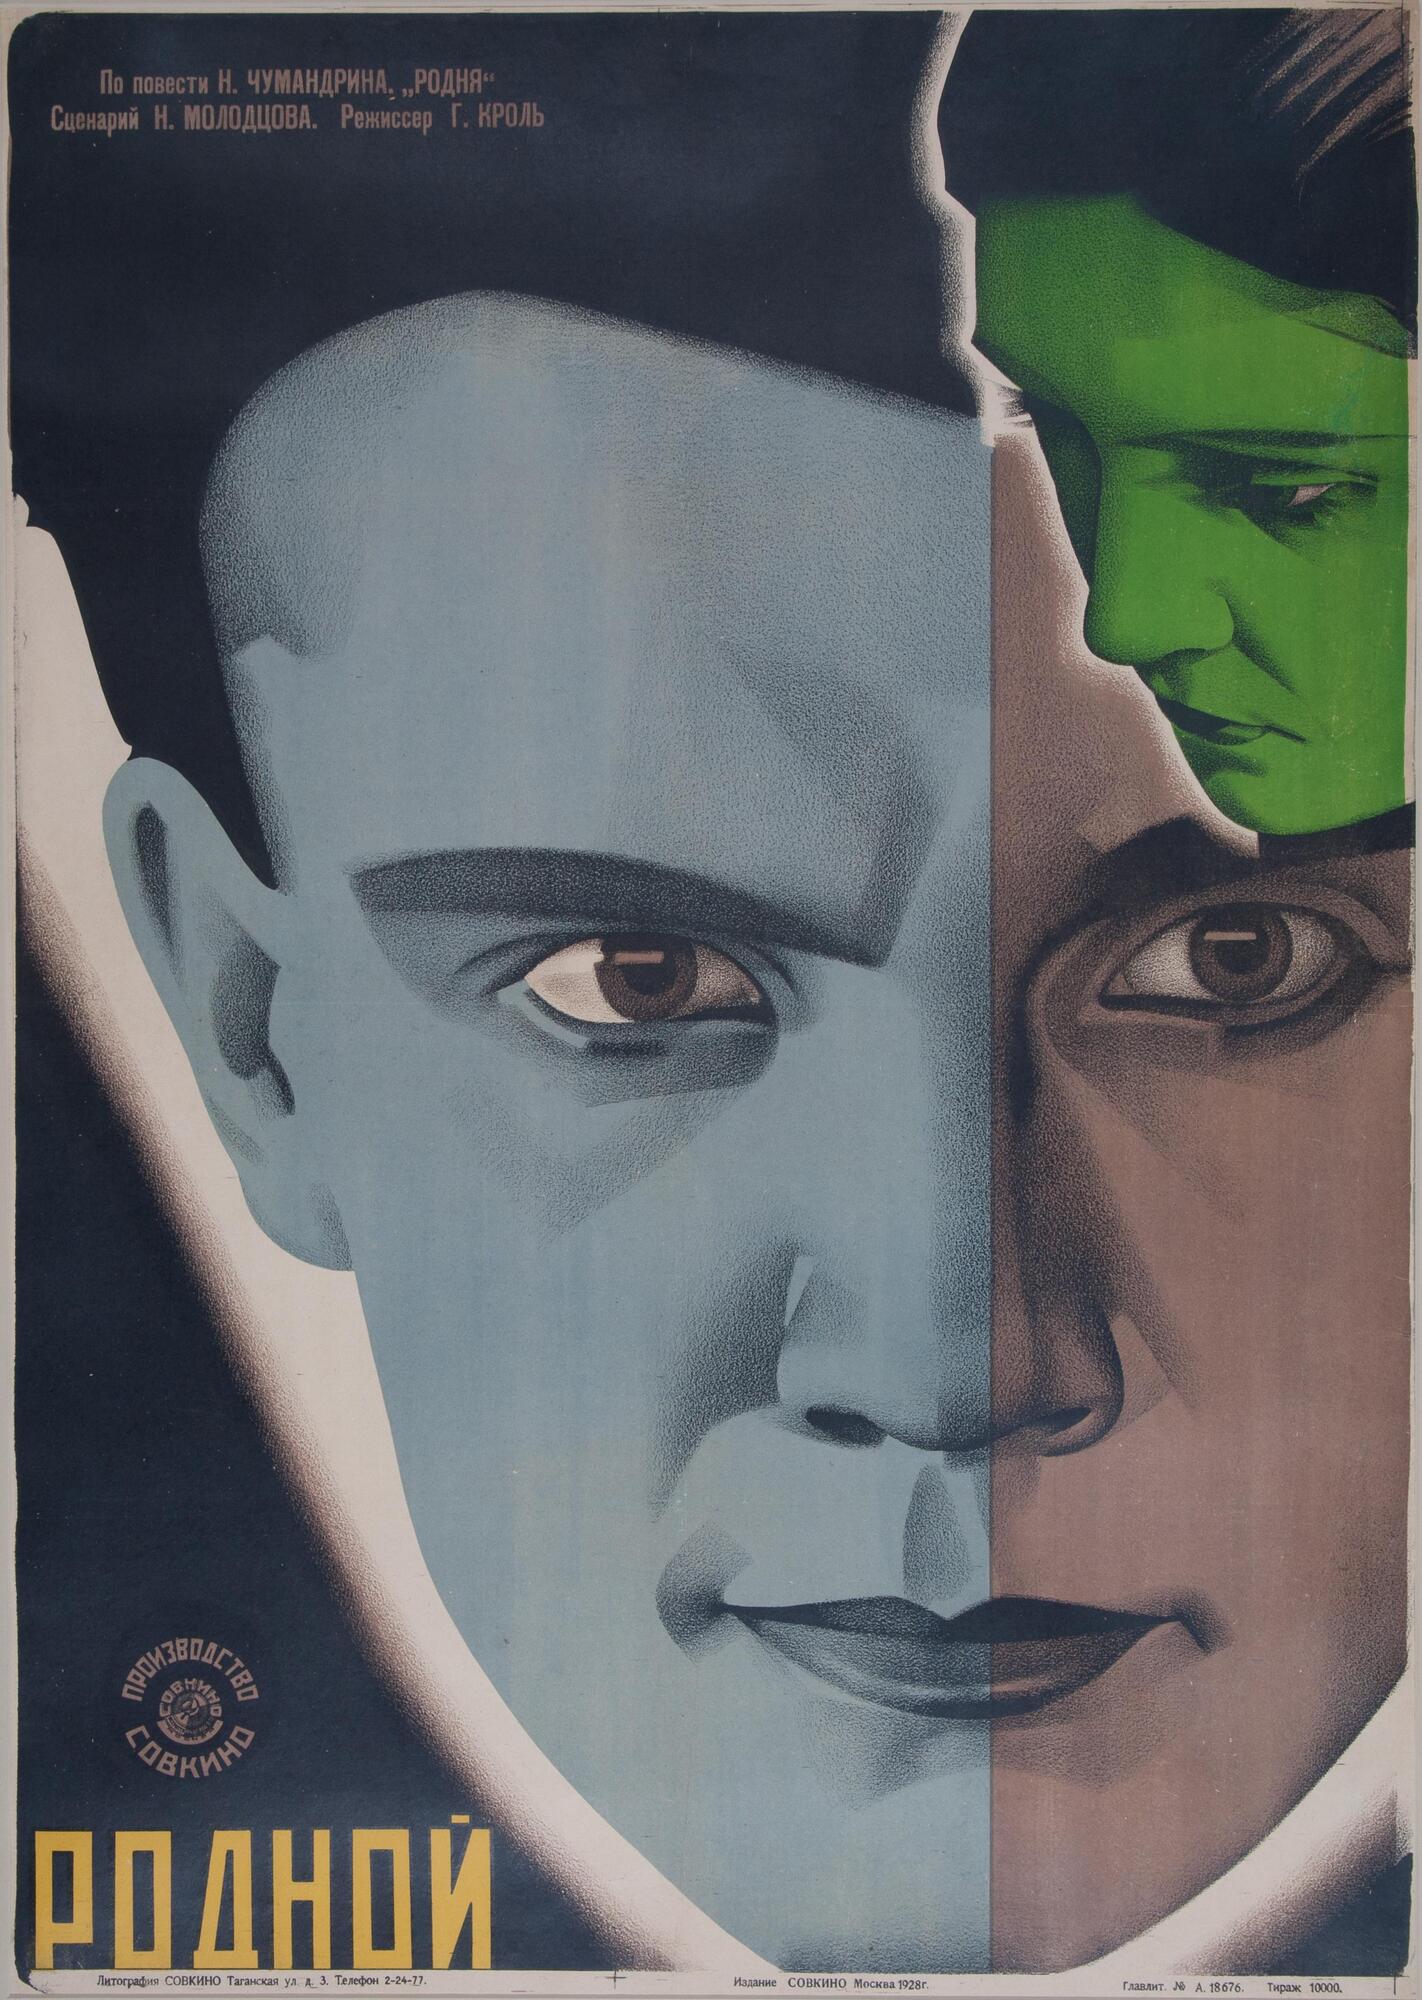 Overall black, yellow, blue, brown and green. Large image of a man&#39;s face that is half blue, half brown and a smaller woman&#39;s profile in green in the upper right hand corner.